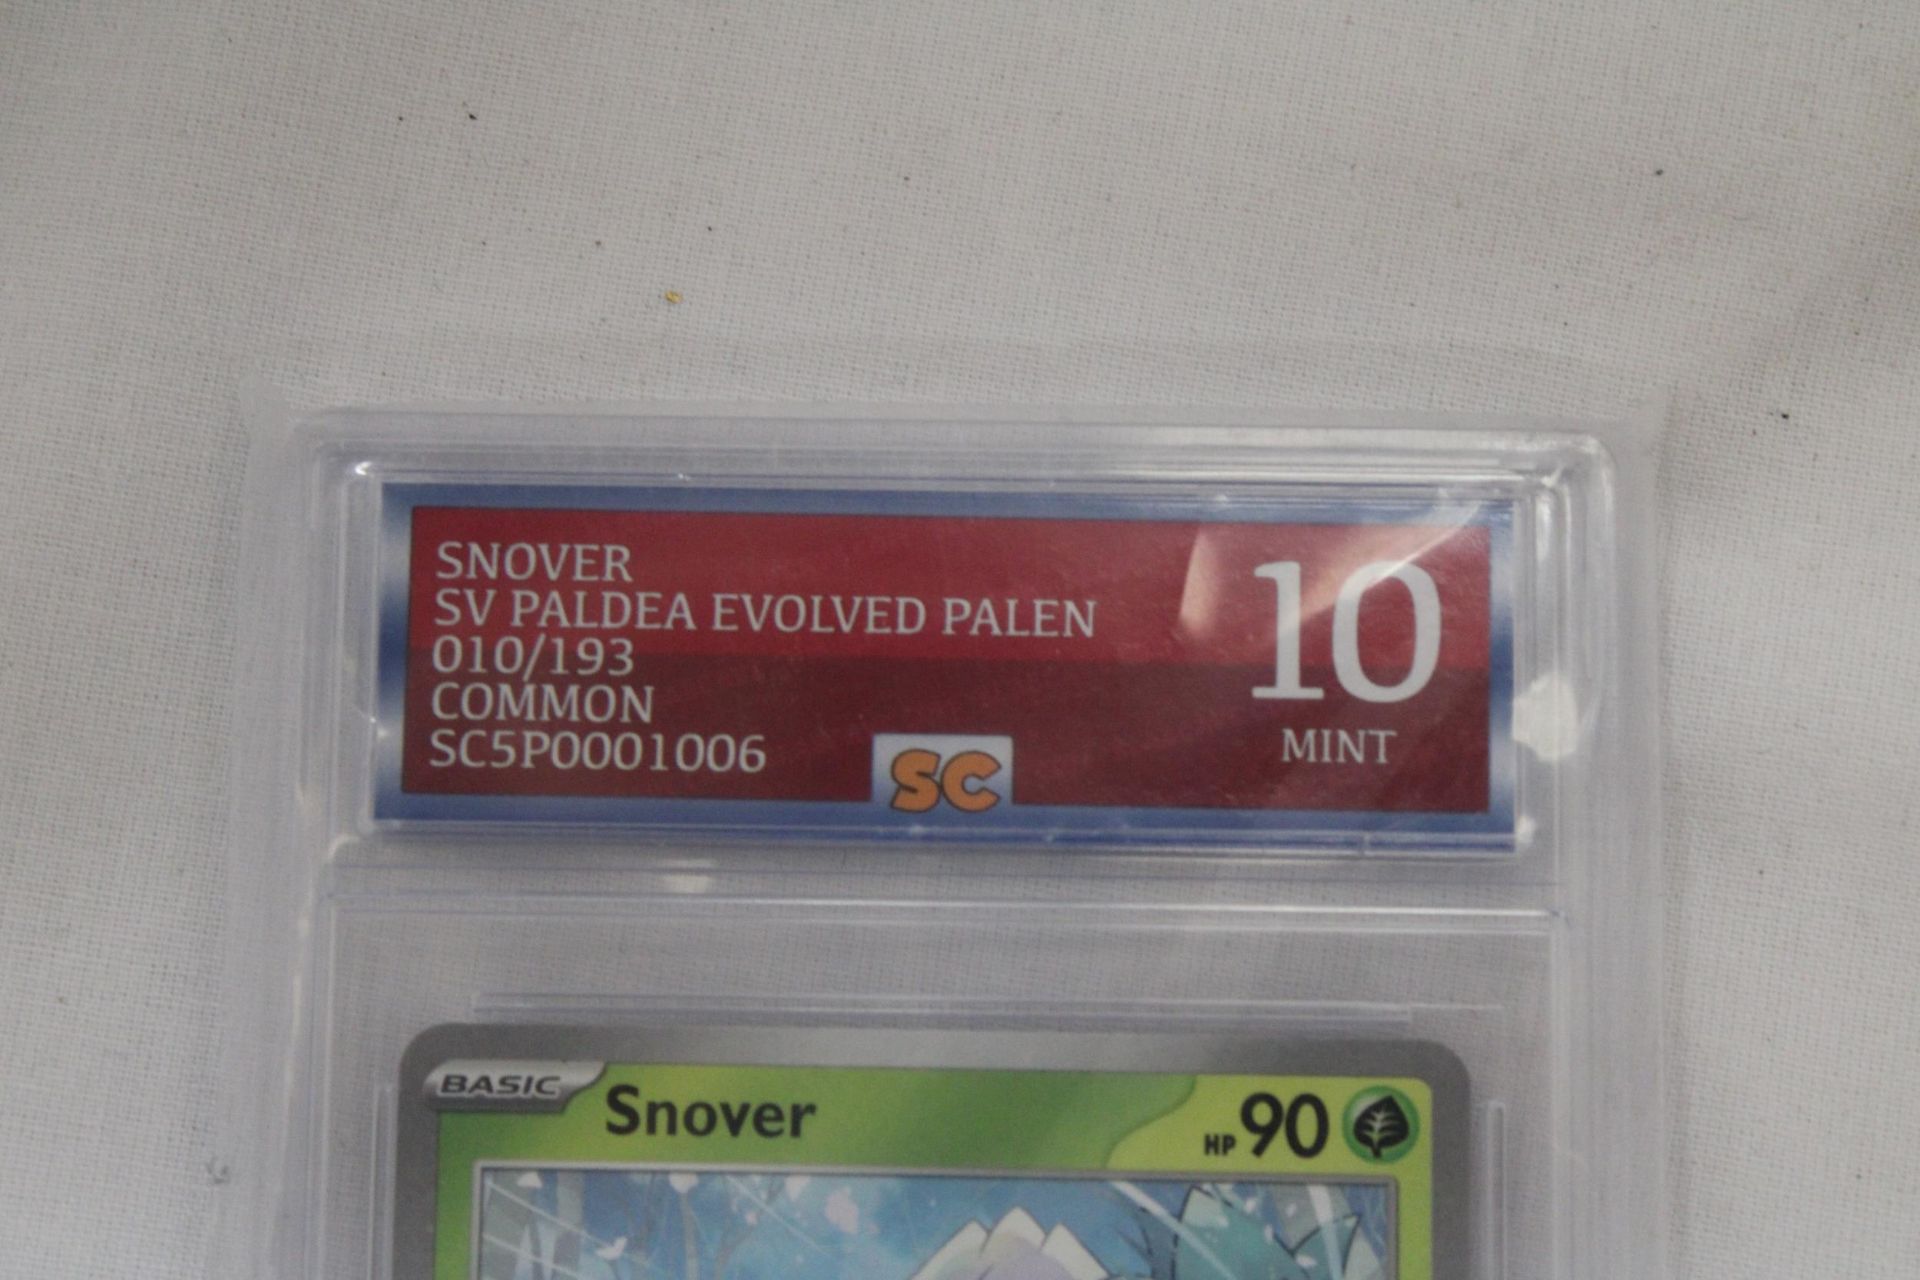 A GRADED POKEMON CARD 10/10 SNOVER - Image 3 of 4